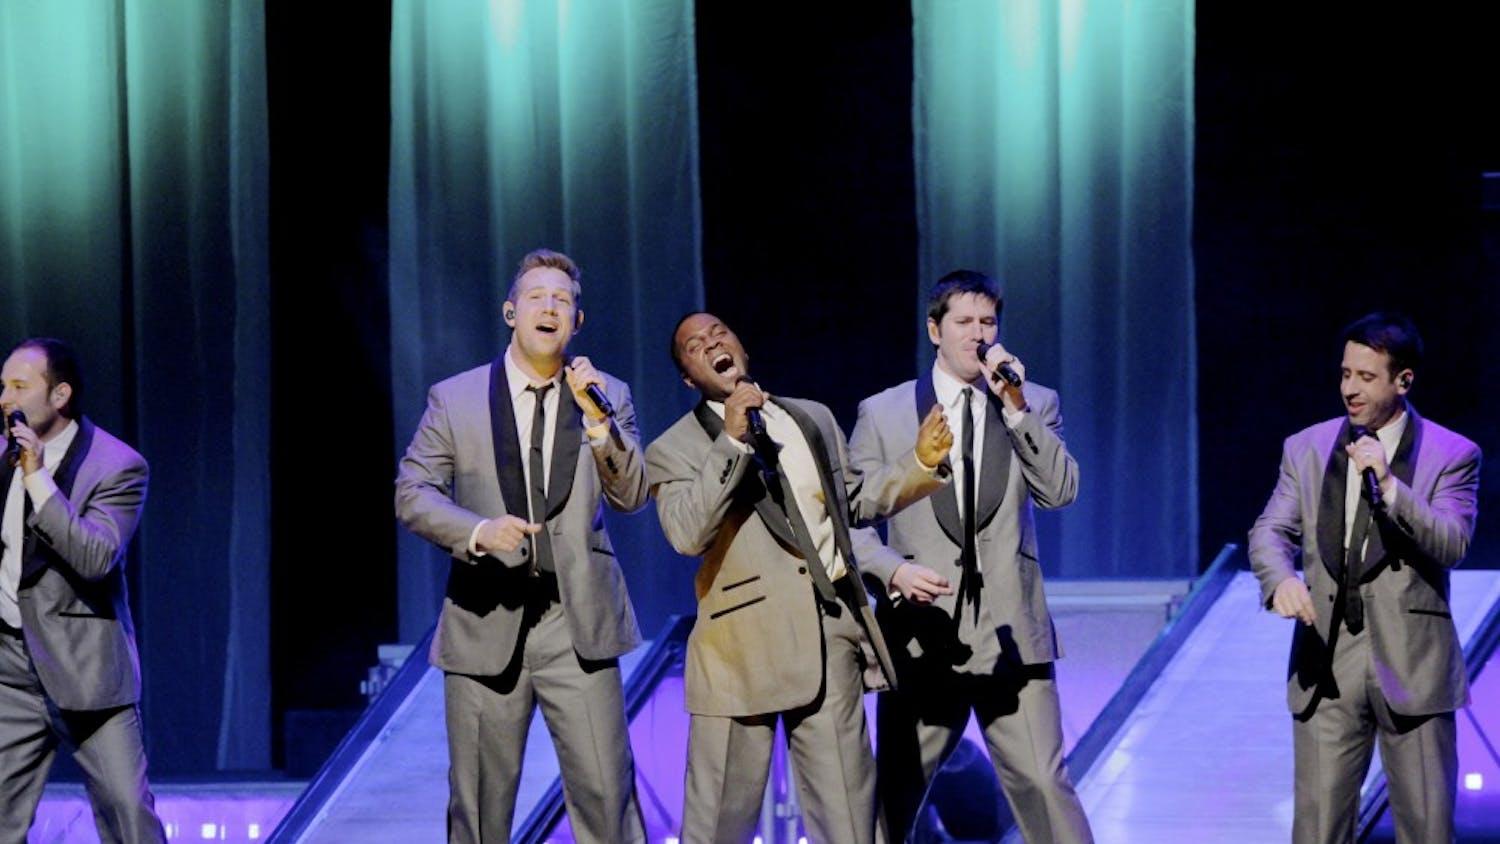 Straight No Chaser performs at the IU Auditorium in 2012. Straight No Chaser is a professional a cappella group consisting of 10 IU alumni, and the group will return to the IU Auditorium during the next academic year.